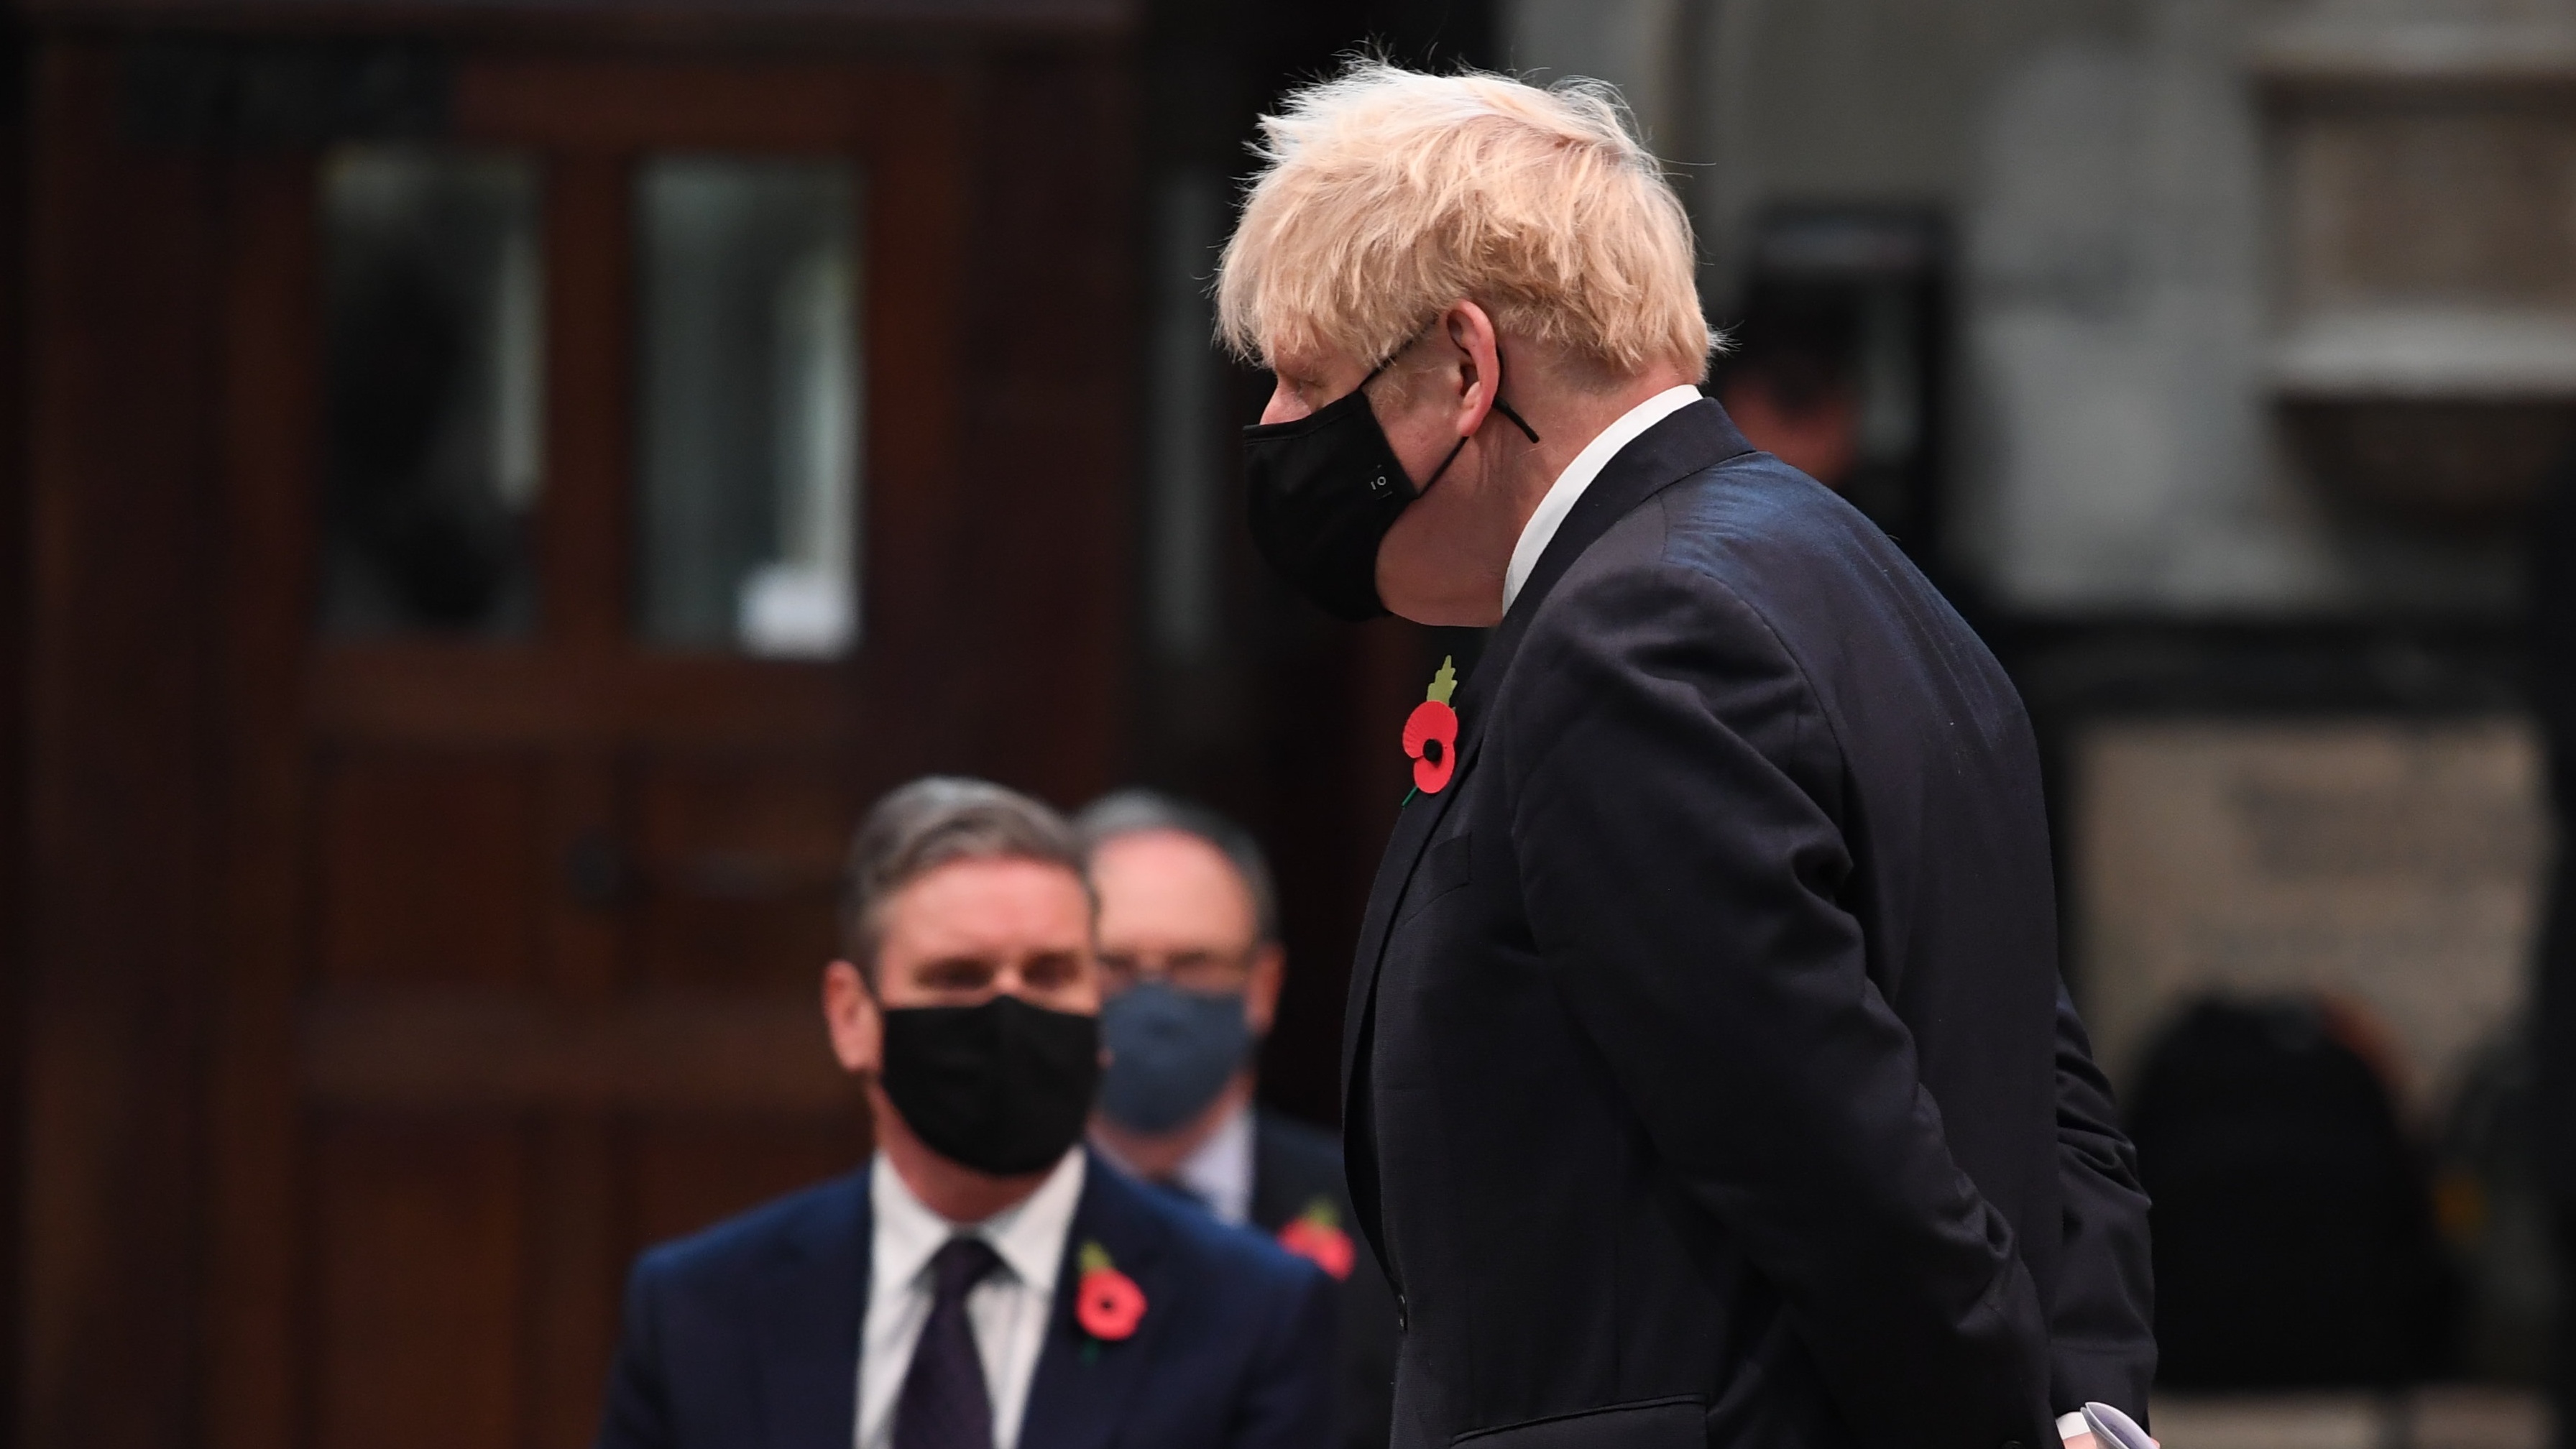 Boris Johnson passes by Keir Starmer as they attend a service to mark Armistice Day